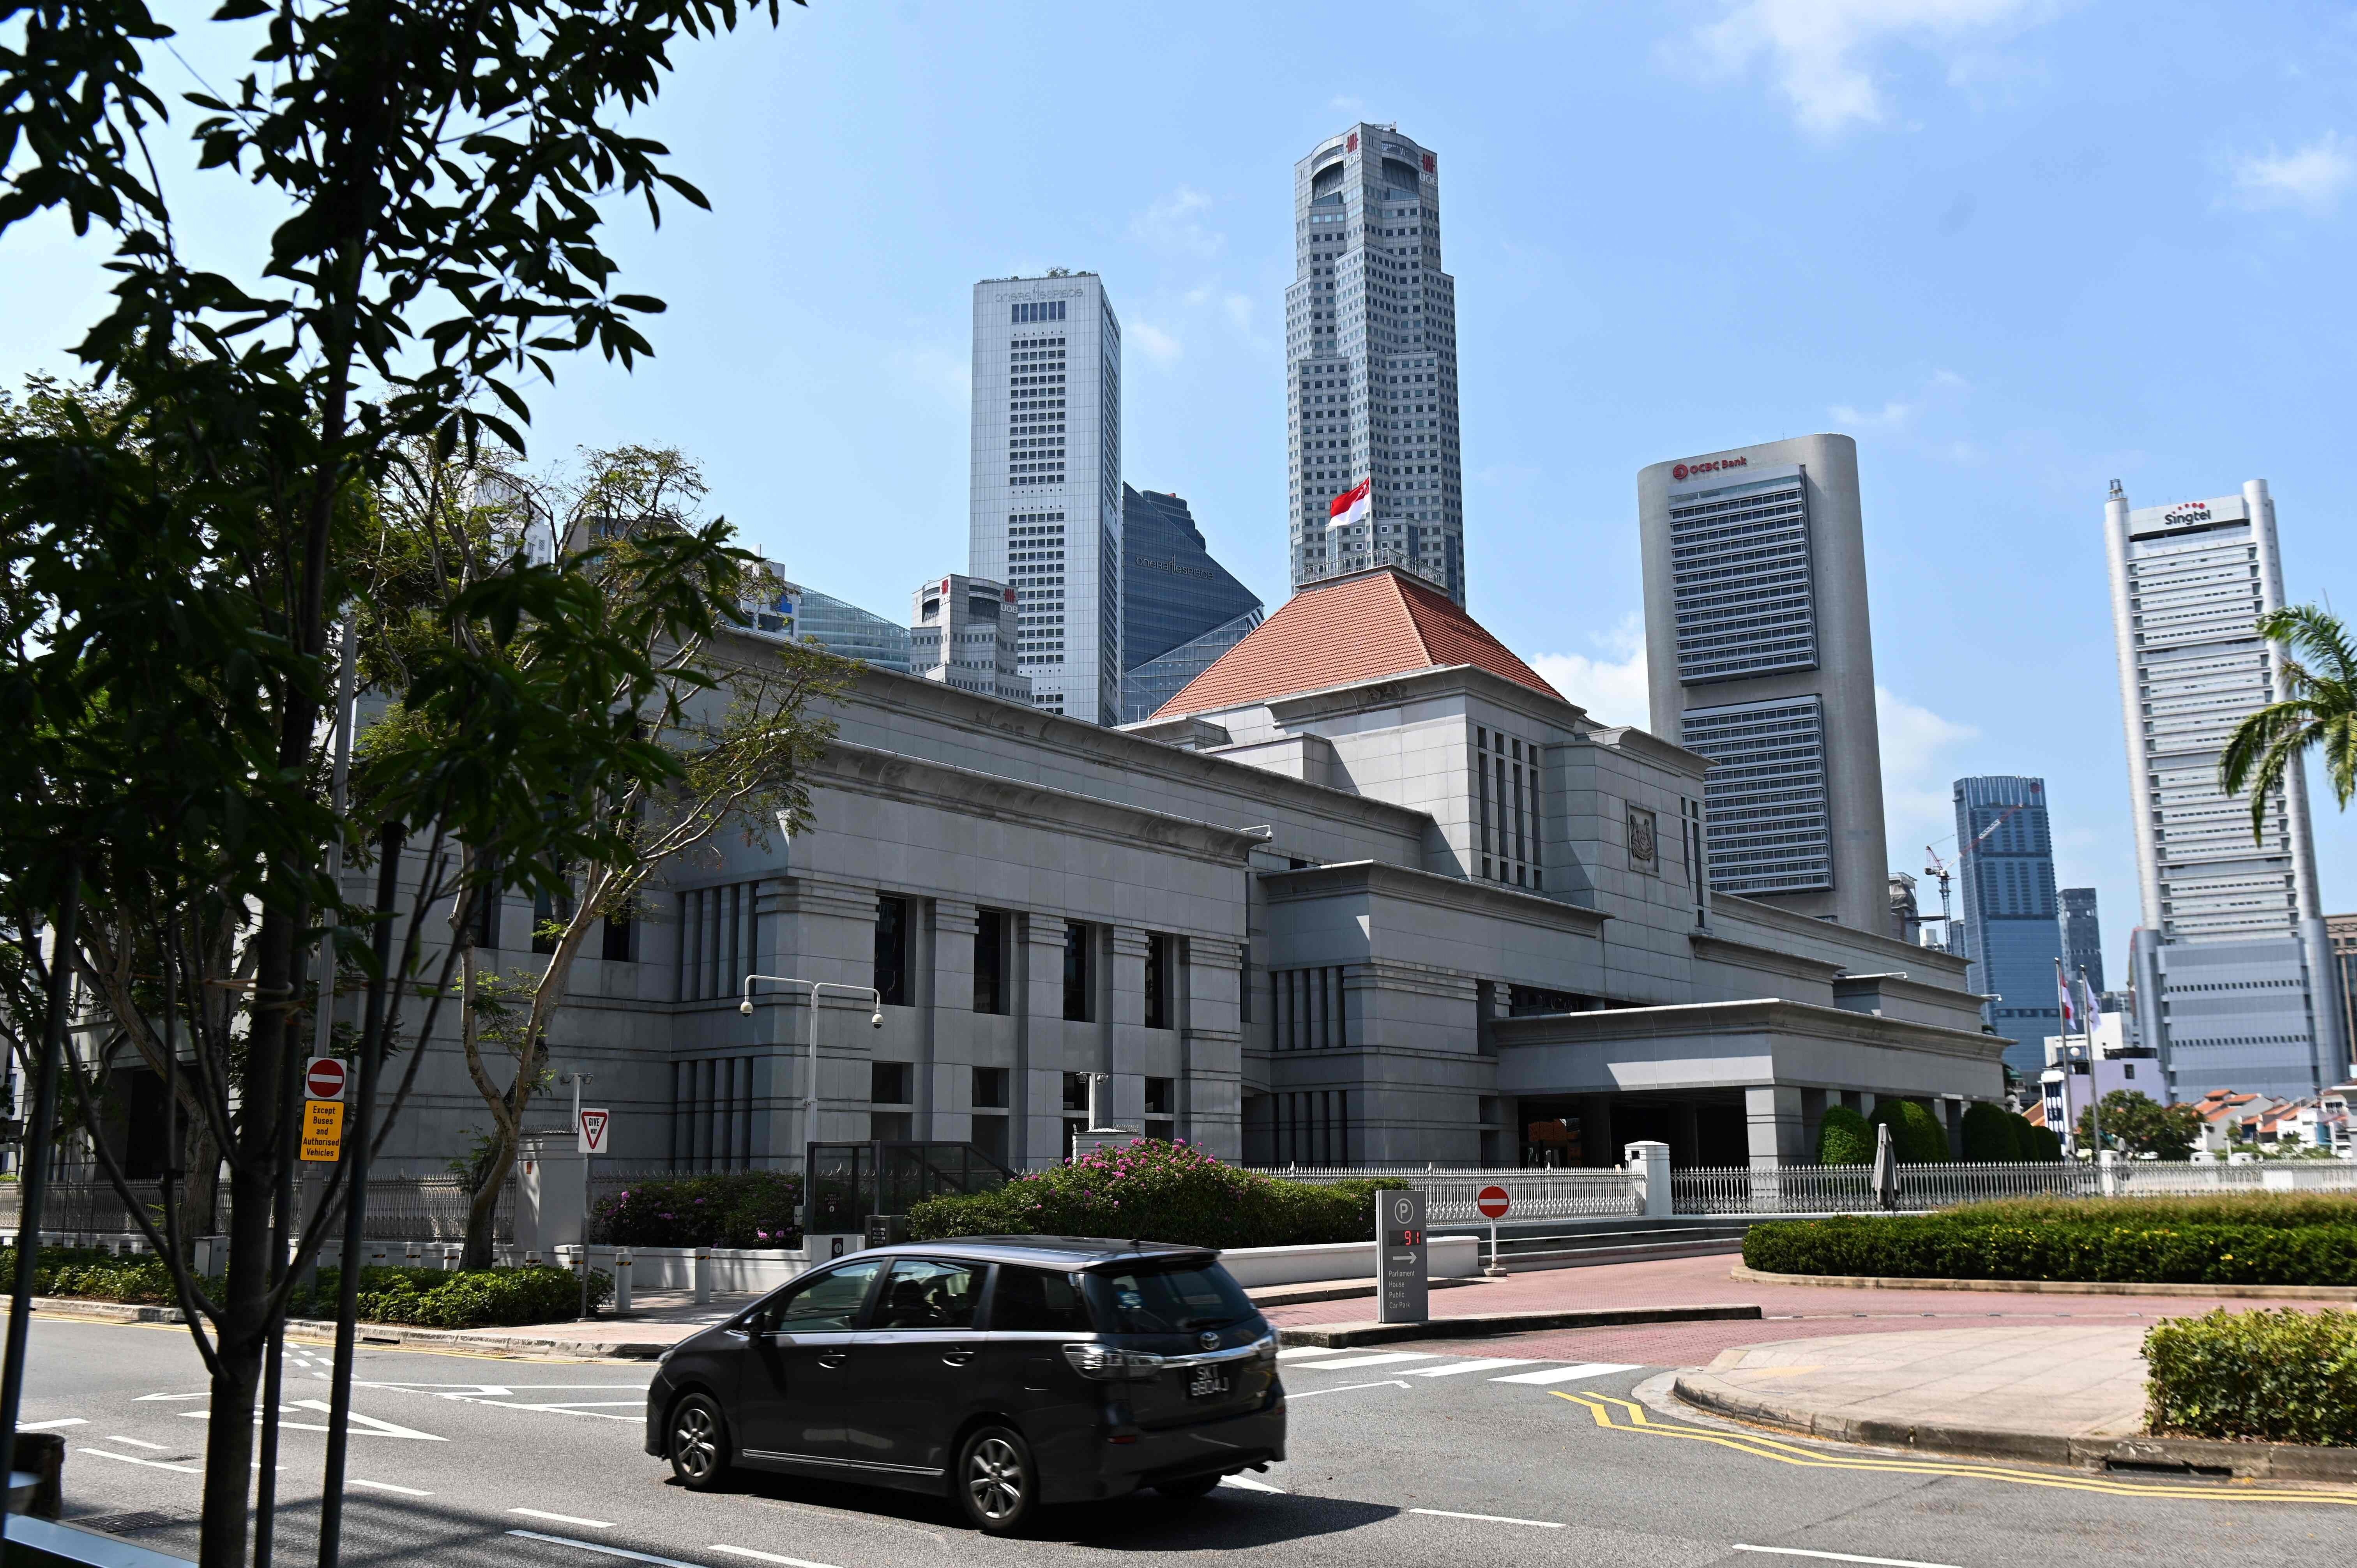 The national flag of Singapore flies on the roof of Parliament House in this file photo. Photo: AFP